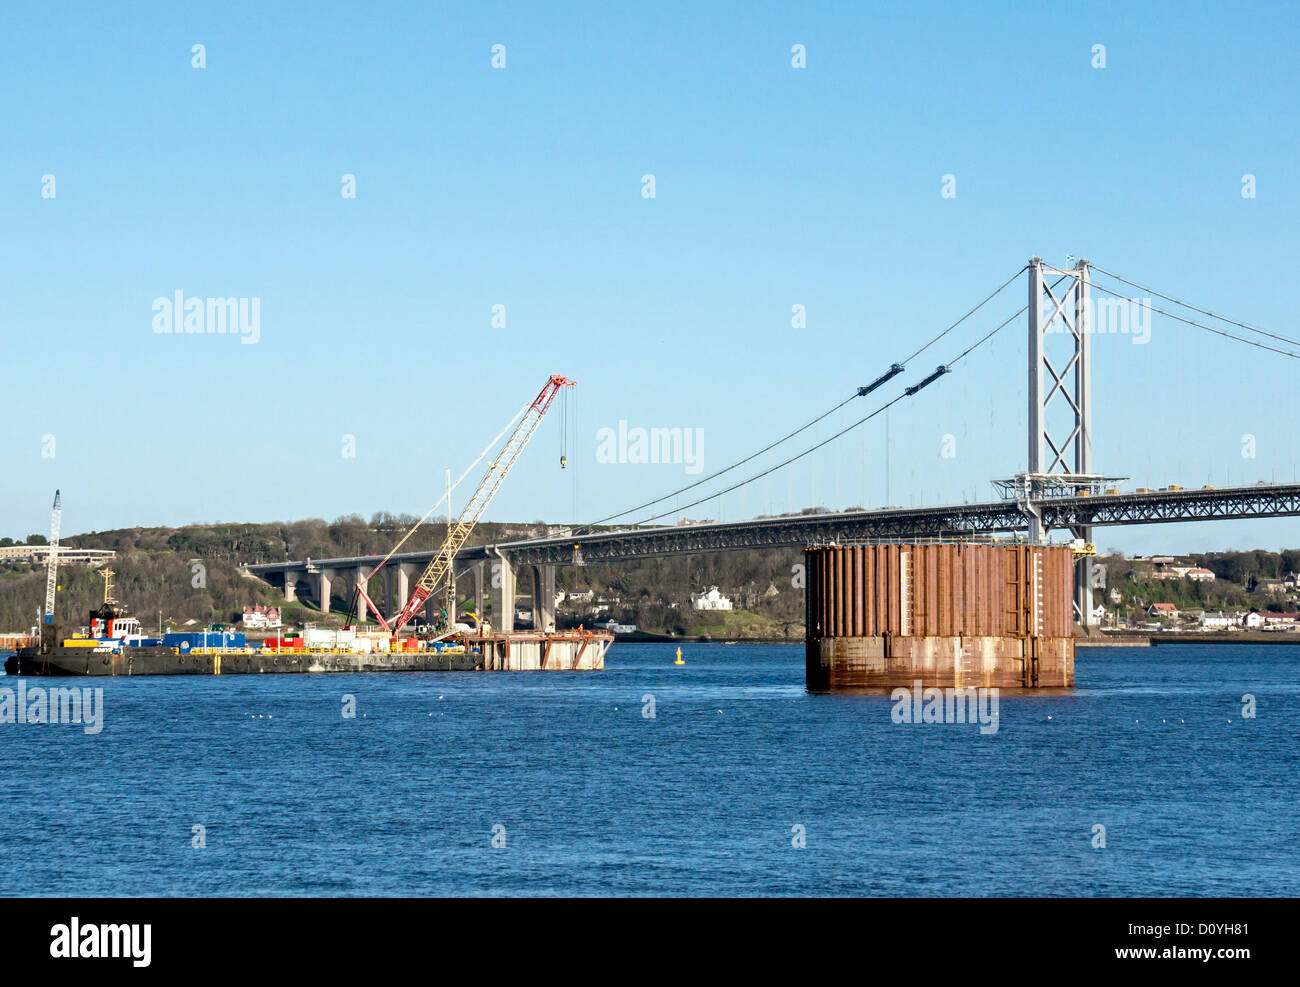 Caissons in place in the Firth of Forth Scotland for the building of the new Firth of Forth road called the Queensferry Crossing Stock Photo